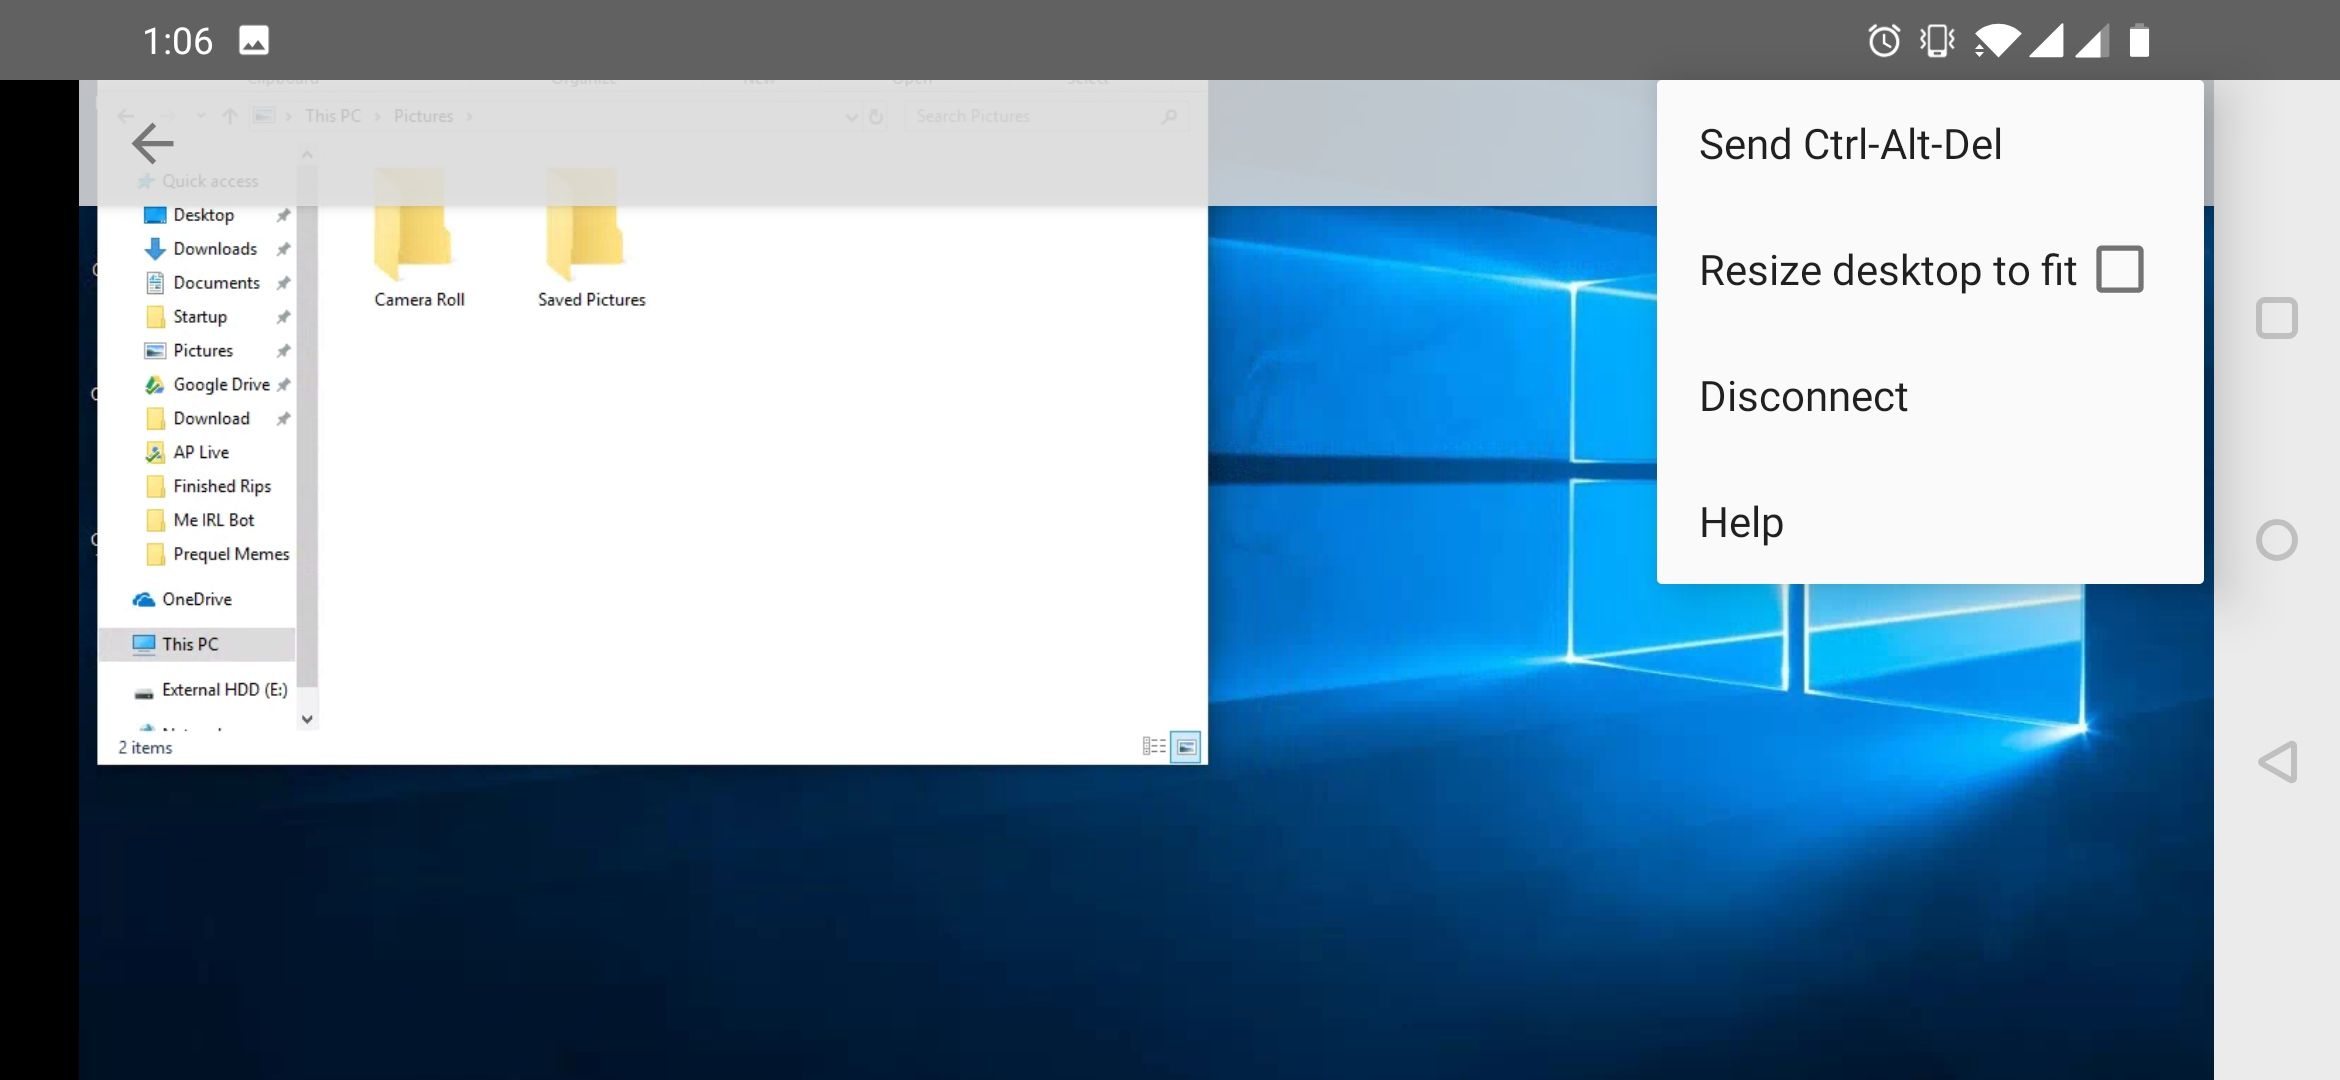 Chrome Remote Desktop v71 adds non-functional display resize